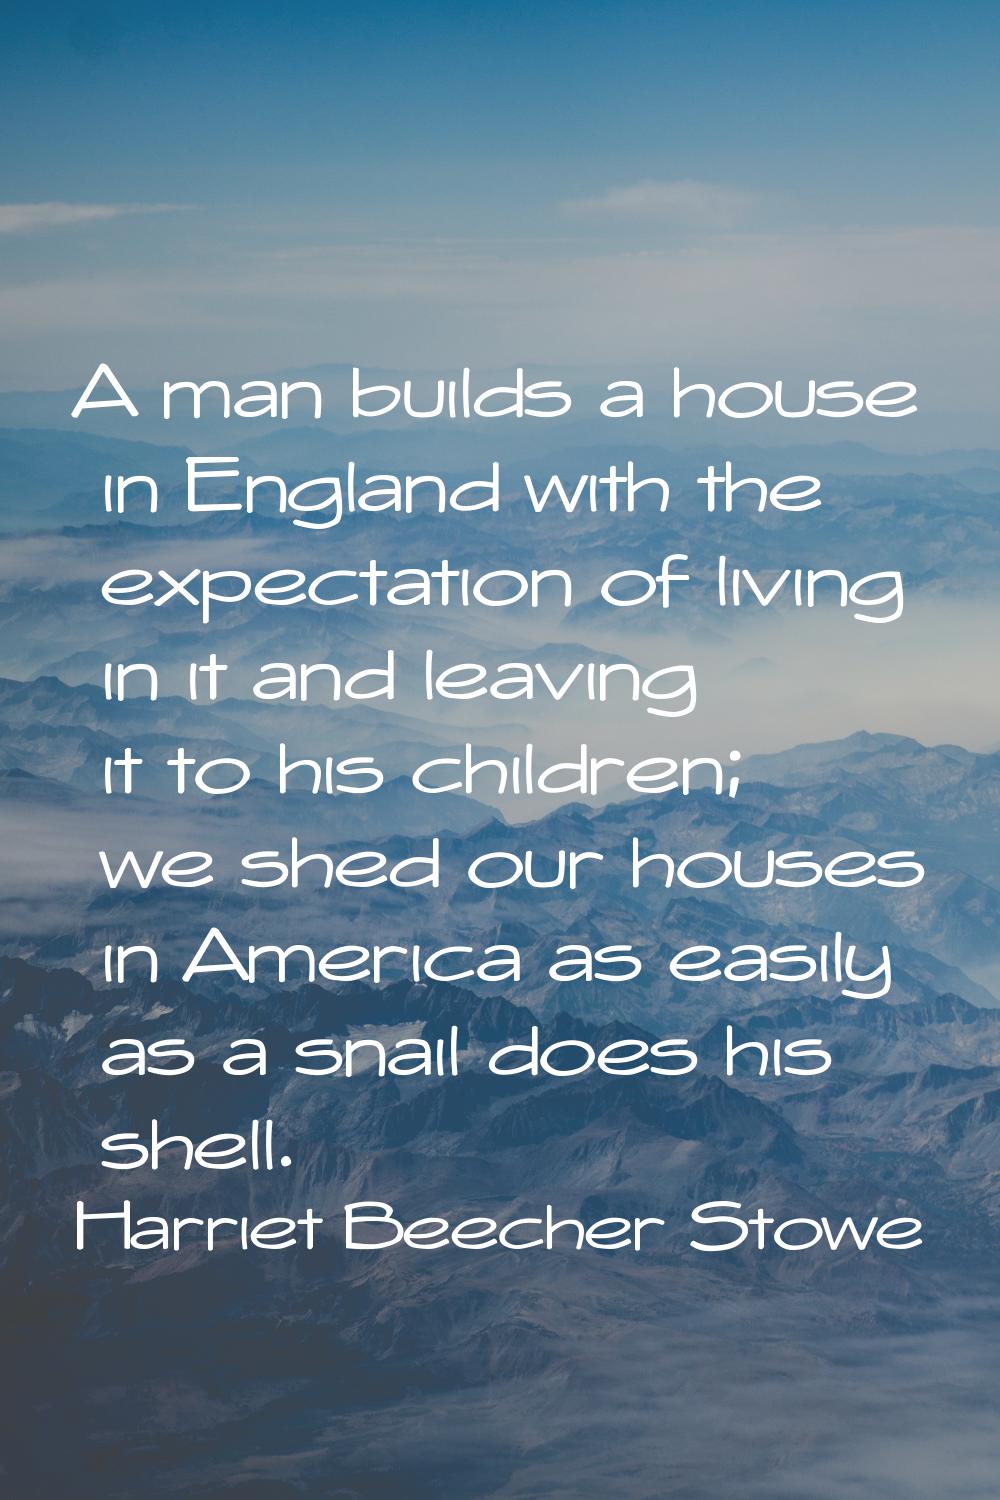 A man builds a house in England with the expectation of living in it and leaving it to his children